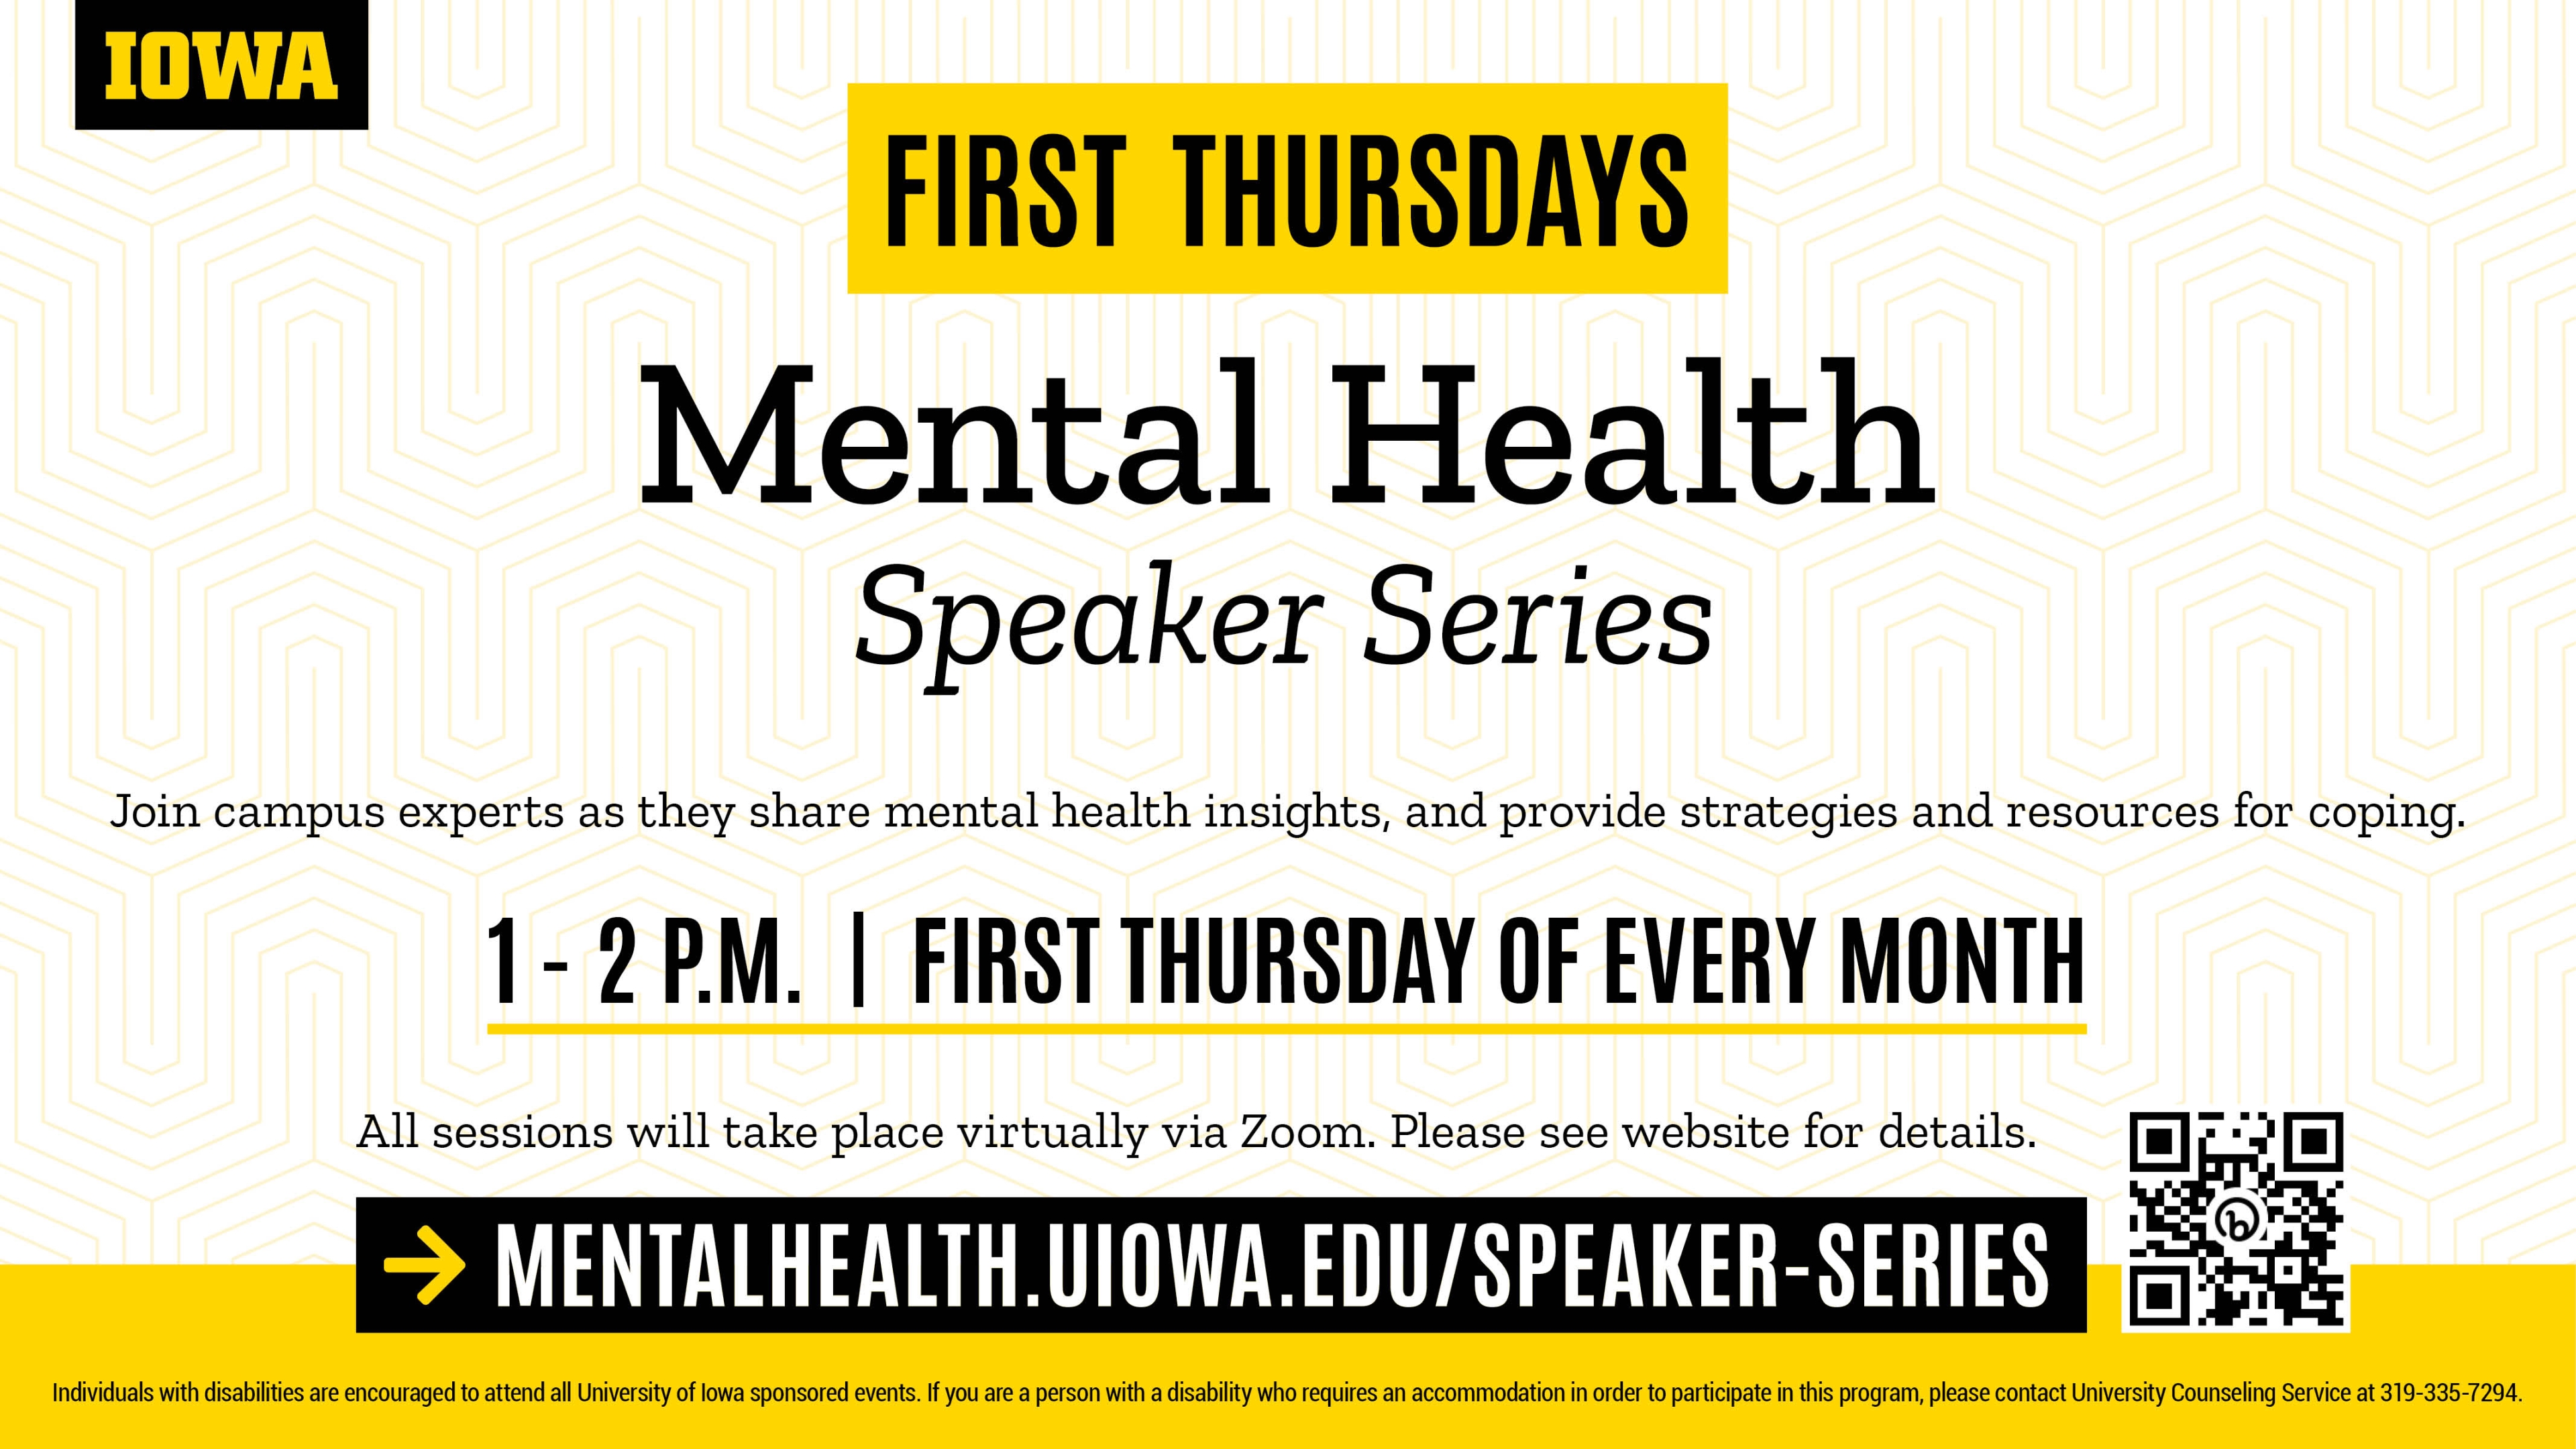 First Thursdays: Mental Health Speaker Series Join campus experts as they share mental health insights and provide strategies and resources for coping. 1 - 2 p.m. | First Thursday of Every Month All presentations will take place via Zoom. Please see website for details. MENTALHEALTH.UIOWA.EDU/SPEAKER-SERIES